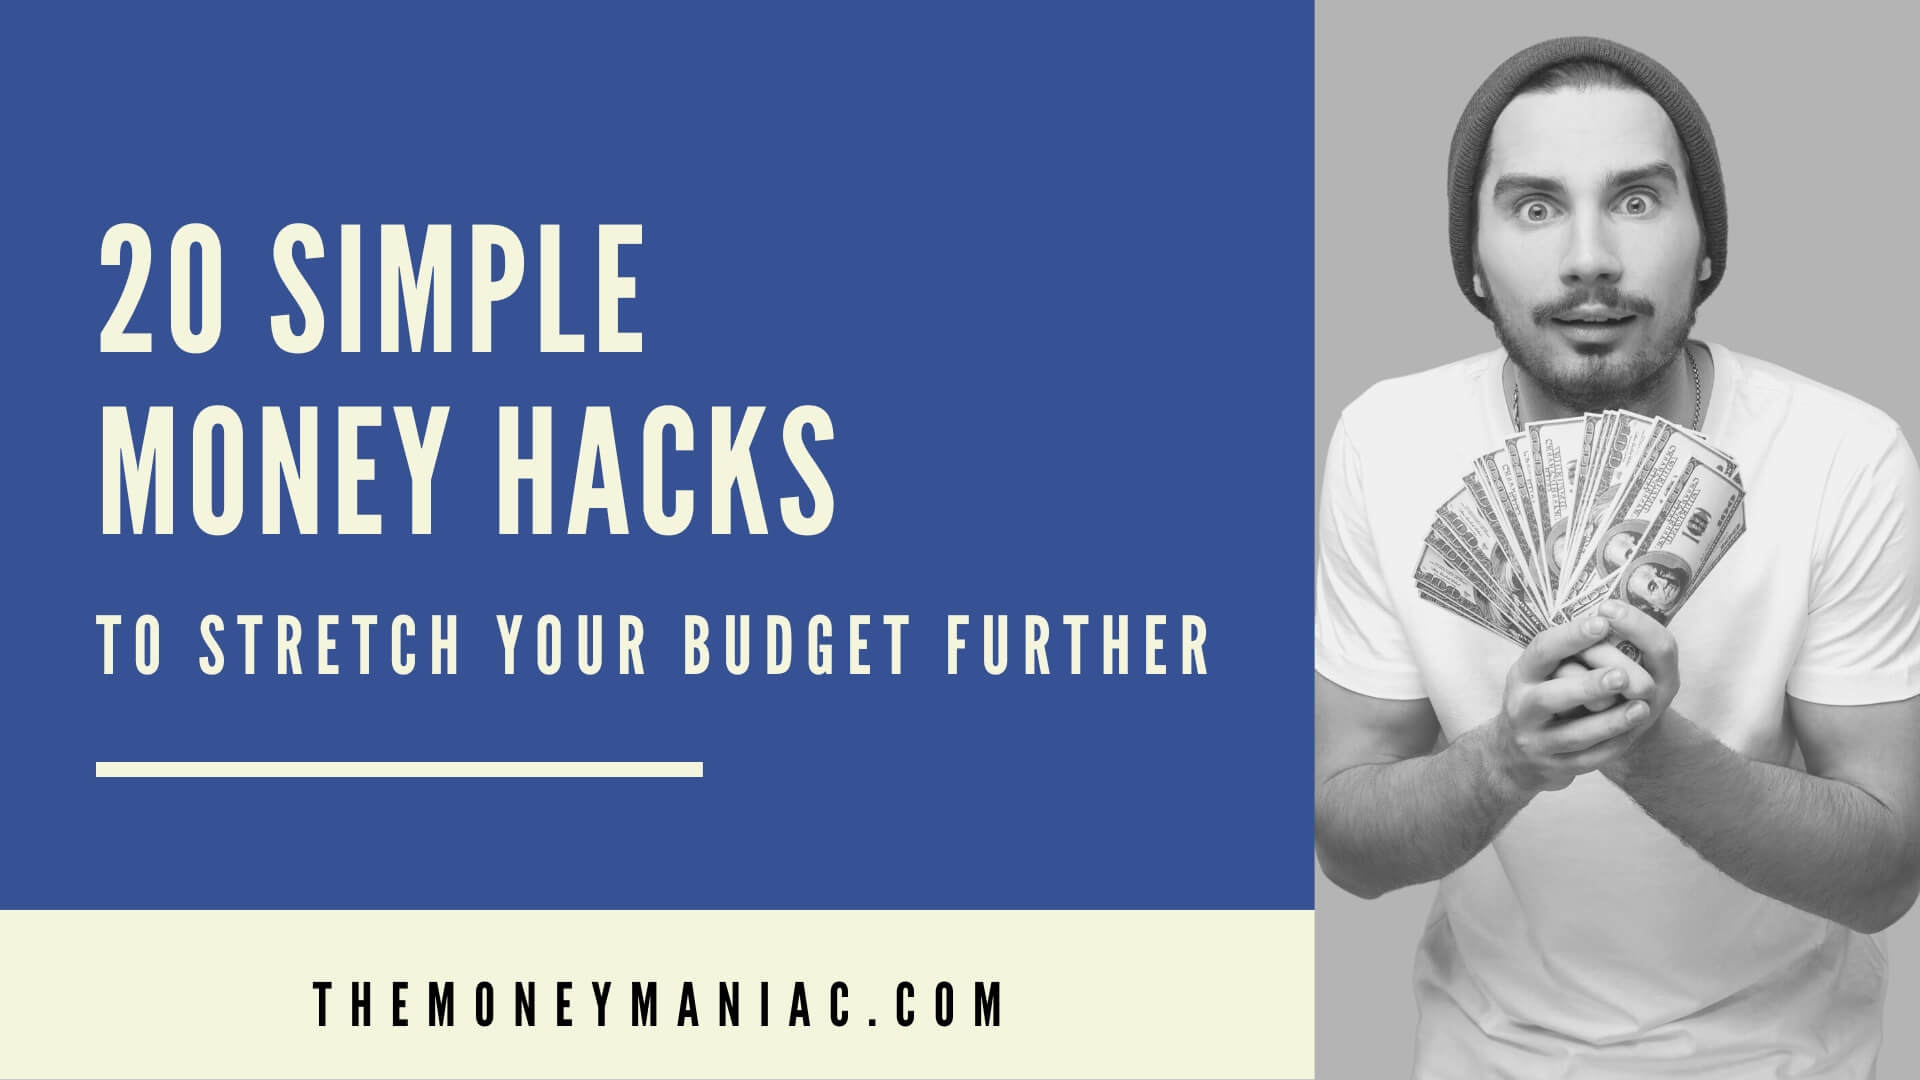 20 Simple Money Hacks To Stretch Your Budget Further